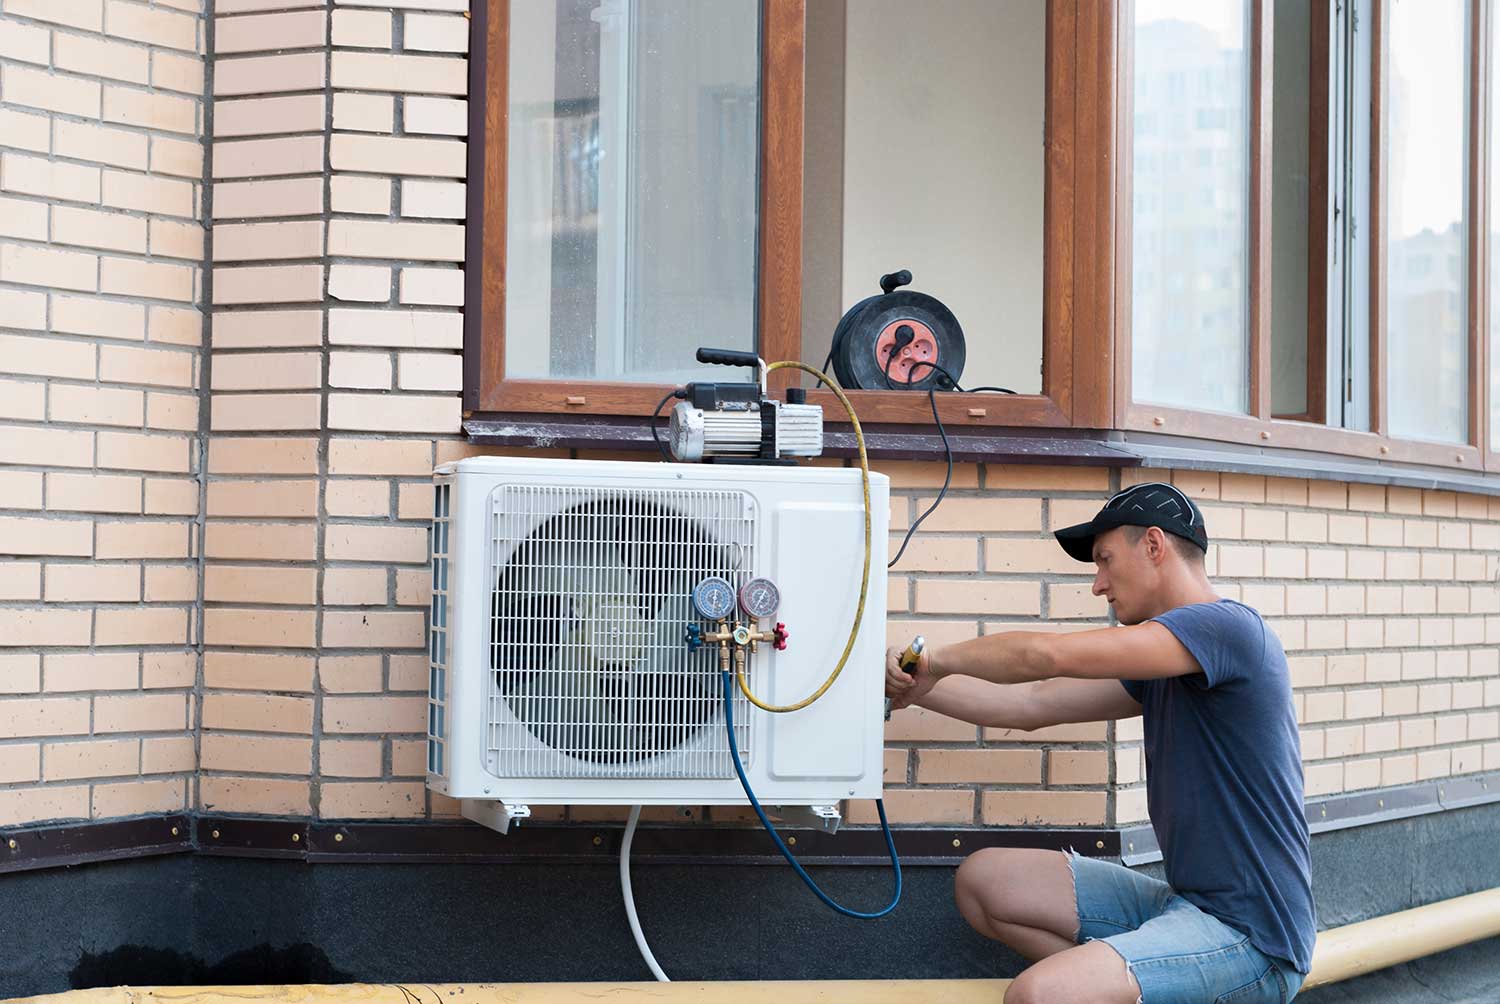 My spouse is hiring someone for heat pumps plus boiler services for his job